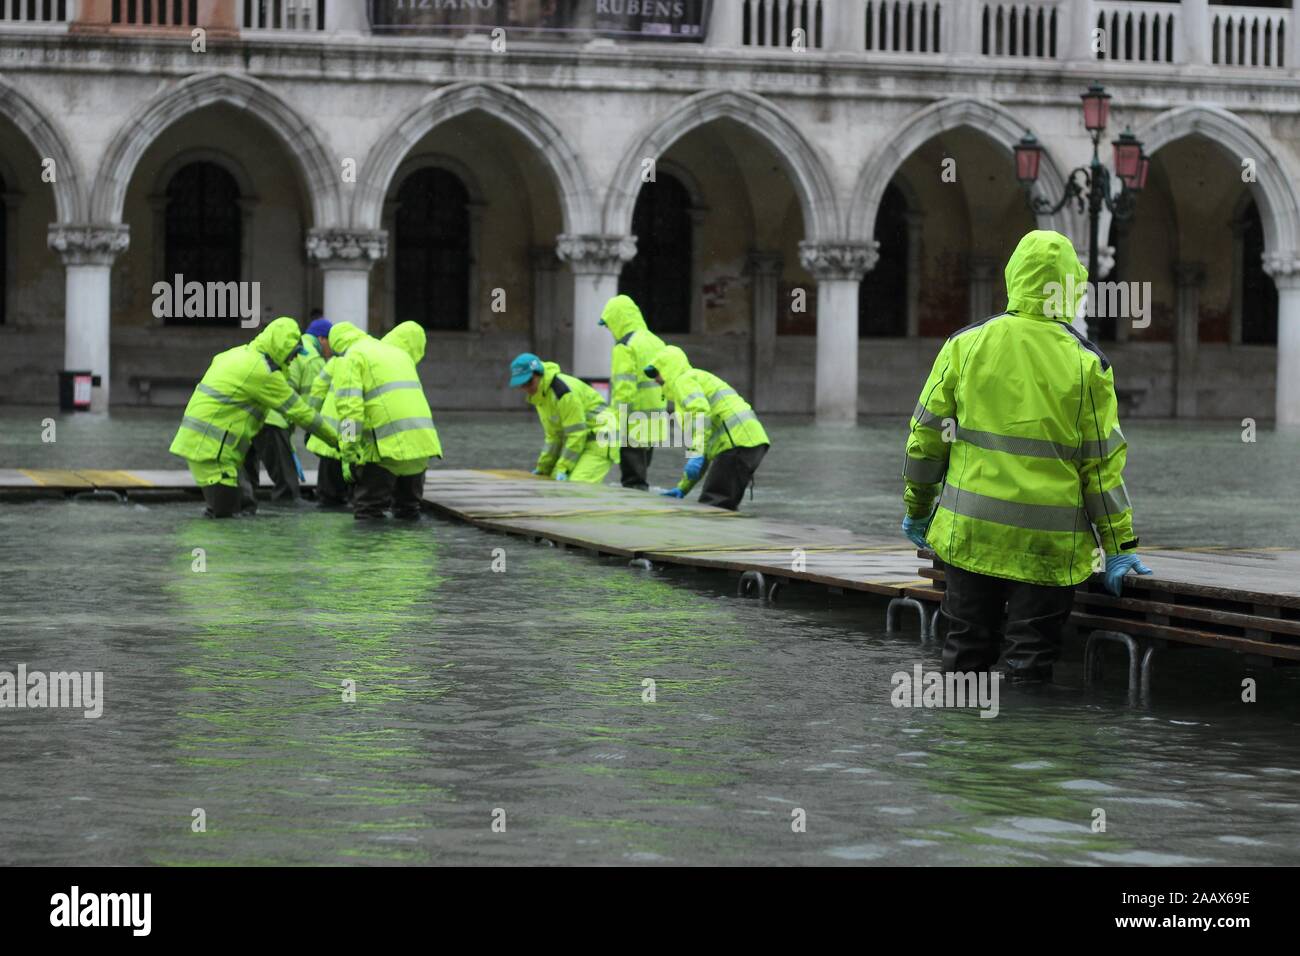 People traverse a provisional footpath built over flood waters Stock Photo